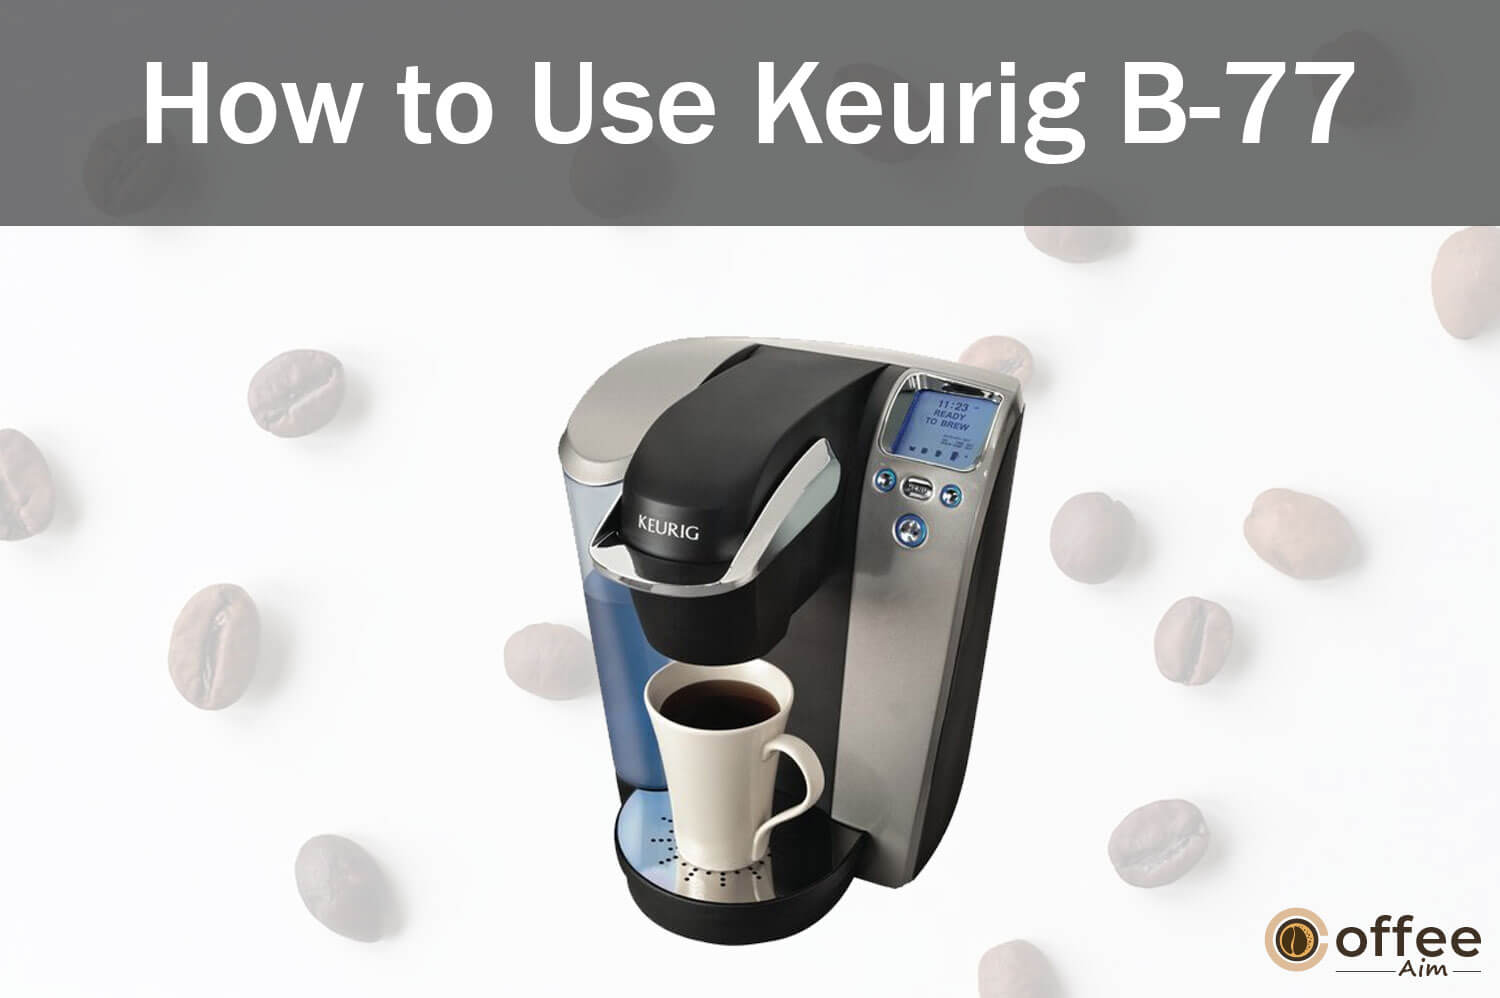 Feature image for the article "How to Use Keurig B-77"